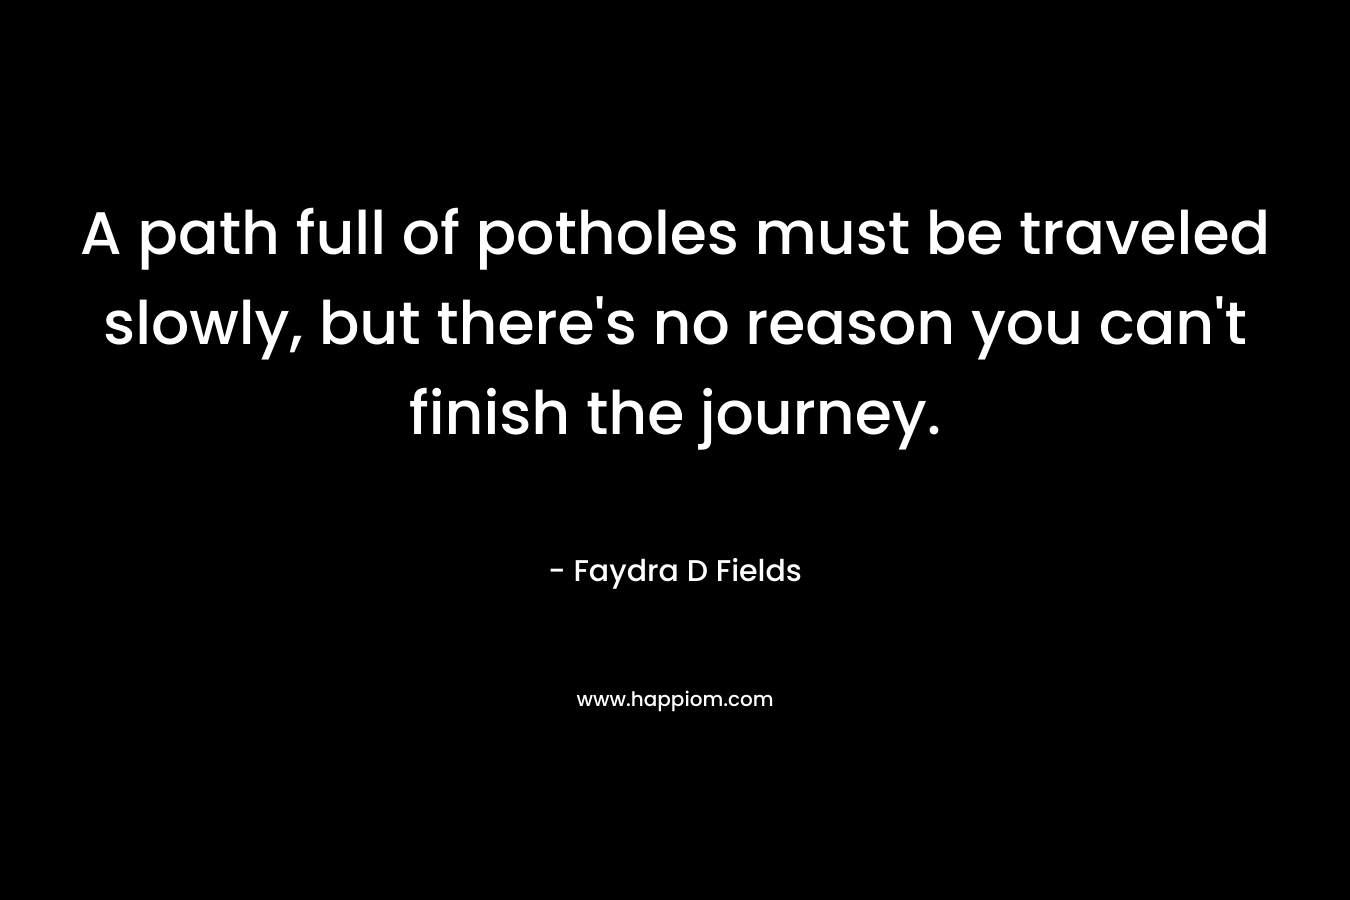 A path full of potholes must be traveled slowly, but there’s no reason you can’t finish the journey. – Faydra D Fields